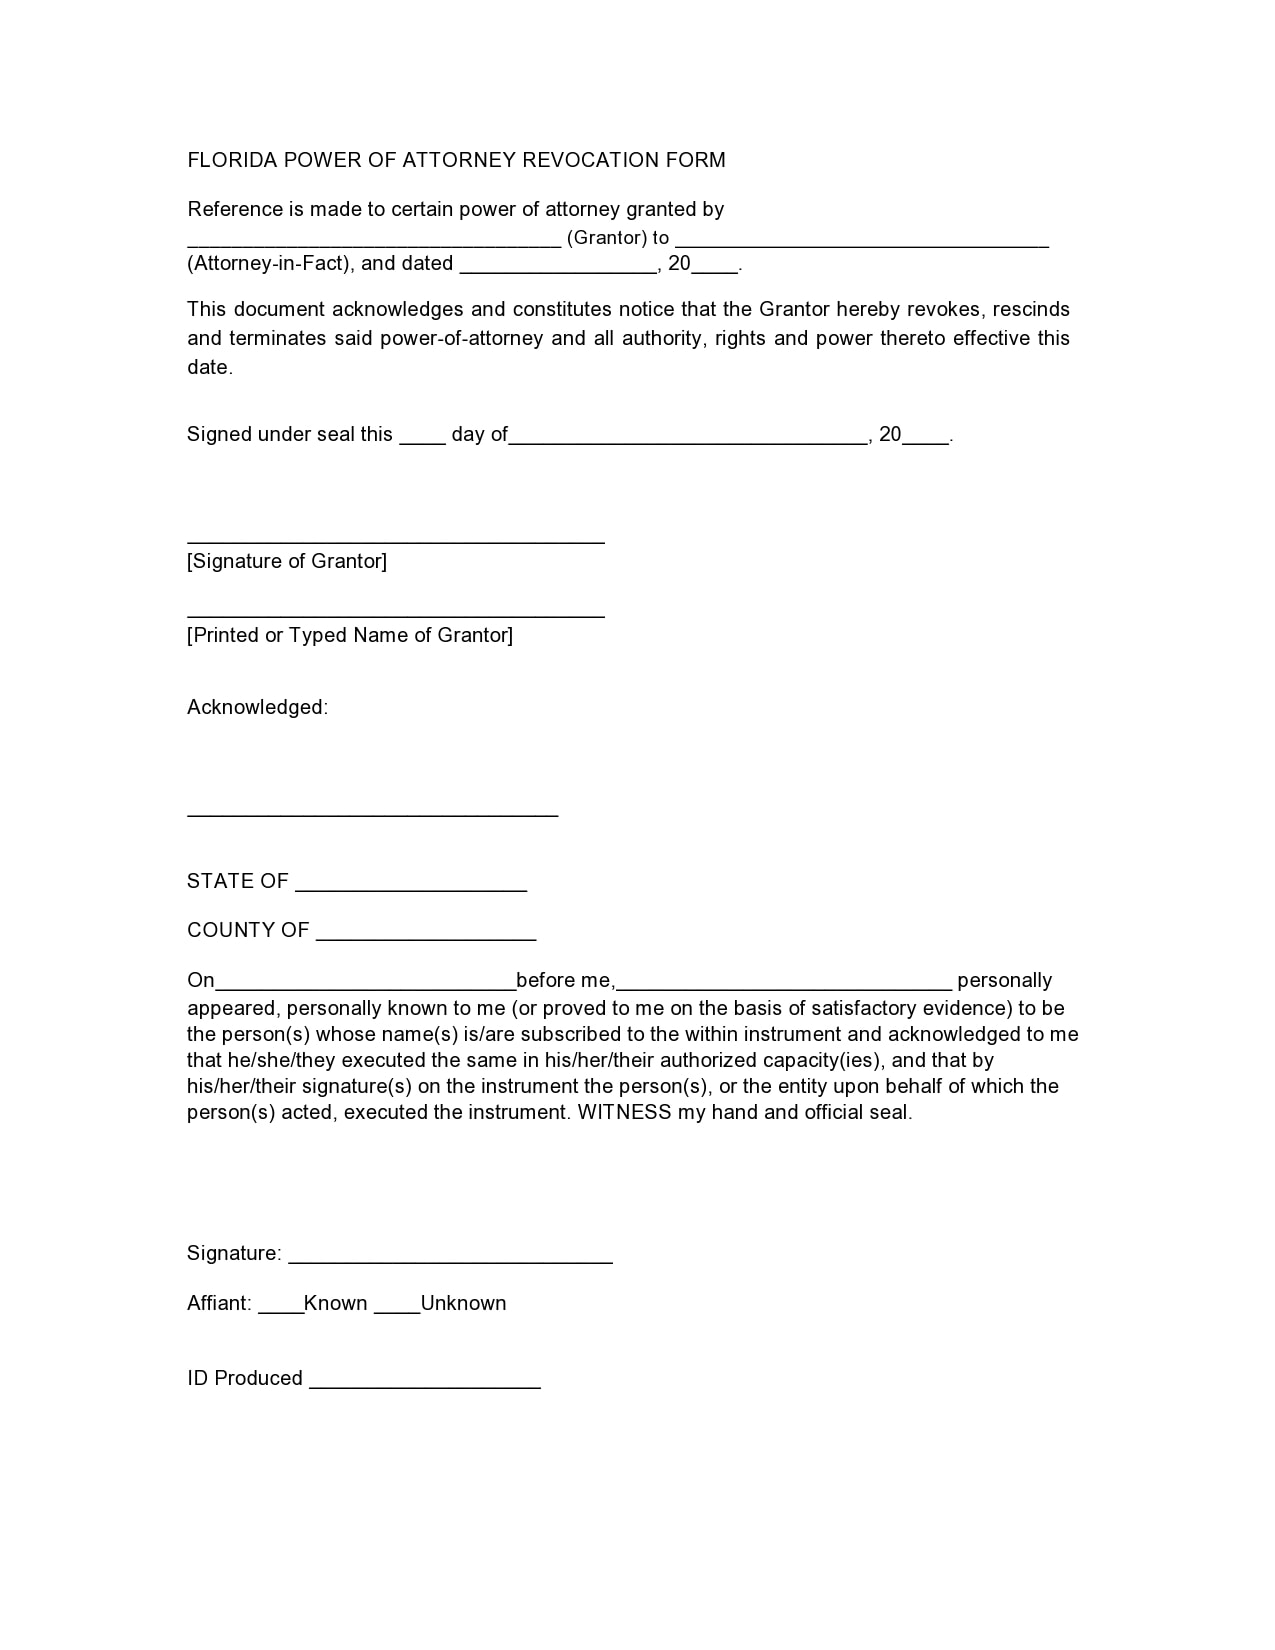 30-free-power-of-attorney-revocation-forms-word-pdf-templatearchive